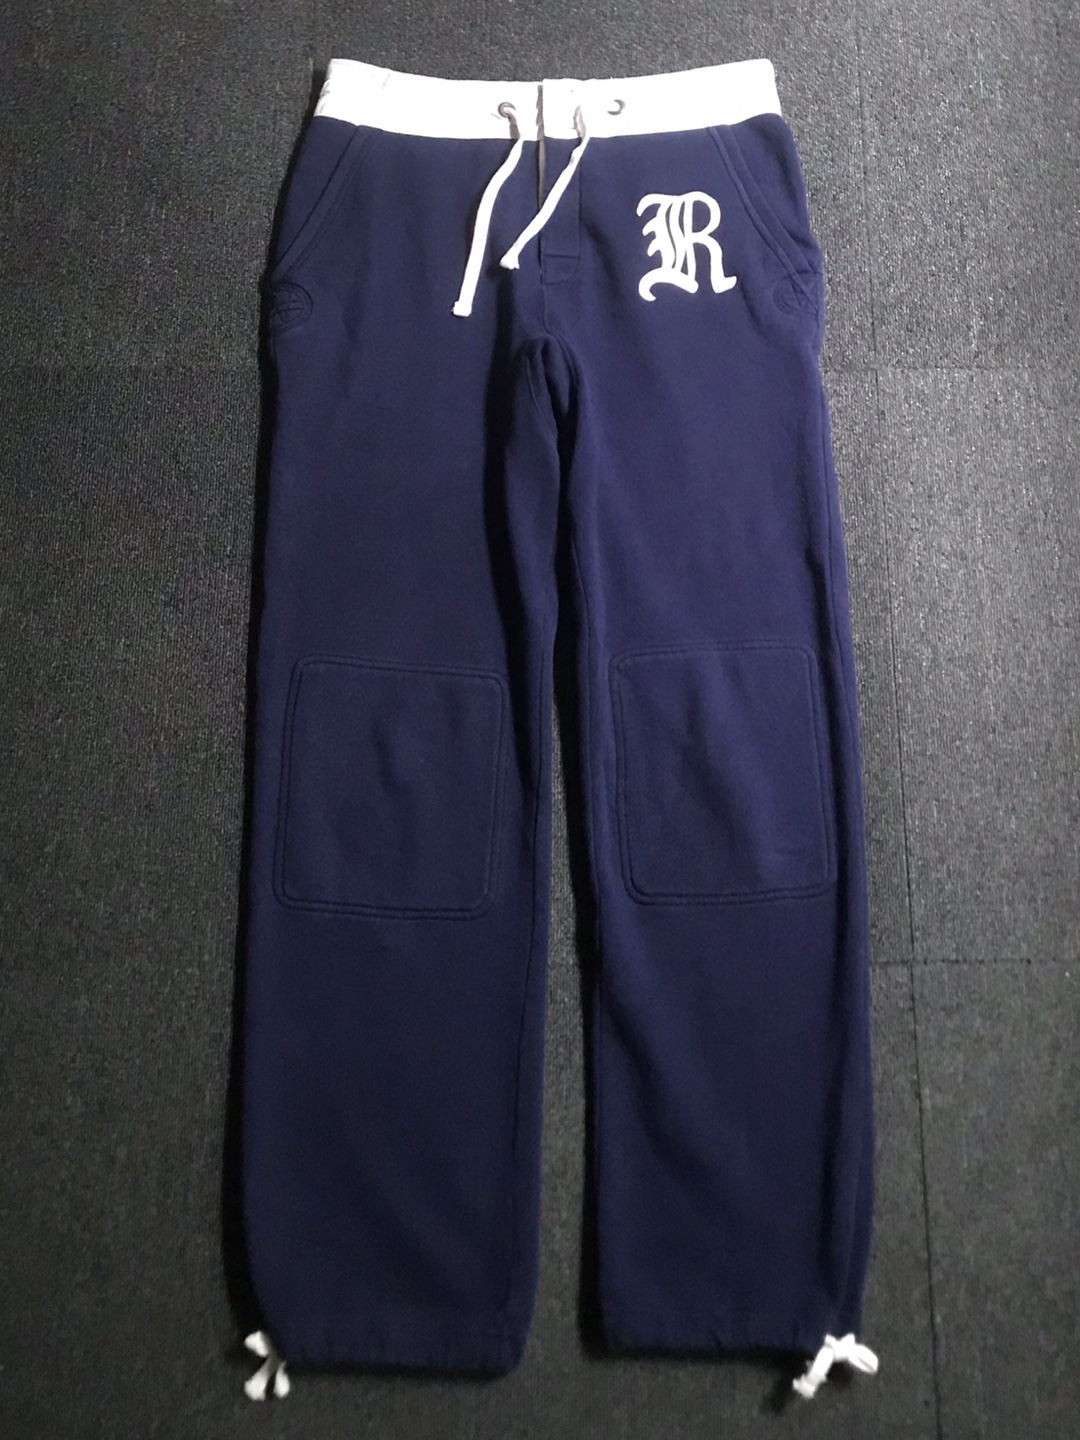 rugby RL embroidered sweatpants with drawstrings (S size, ~33인치 추천)